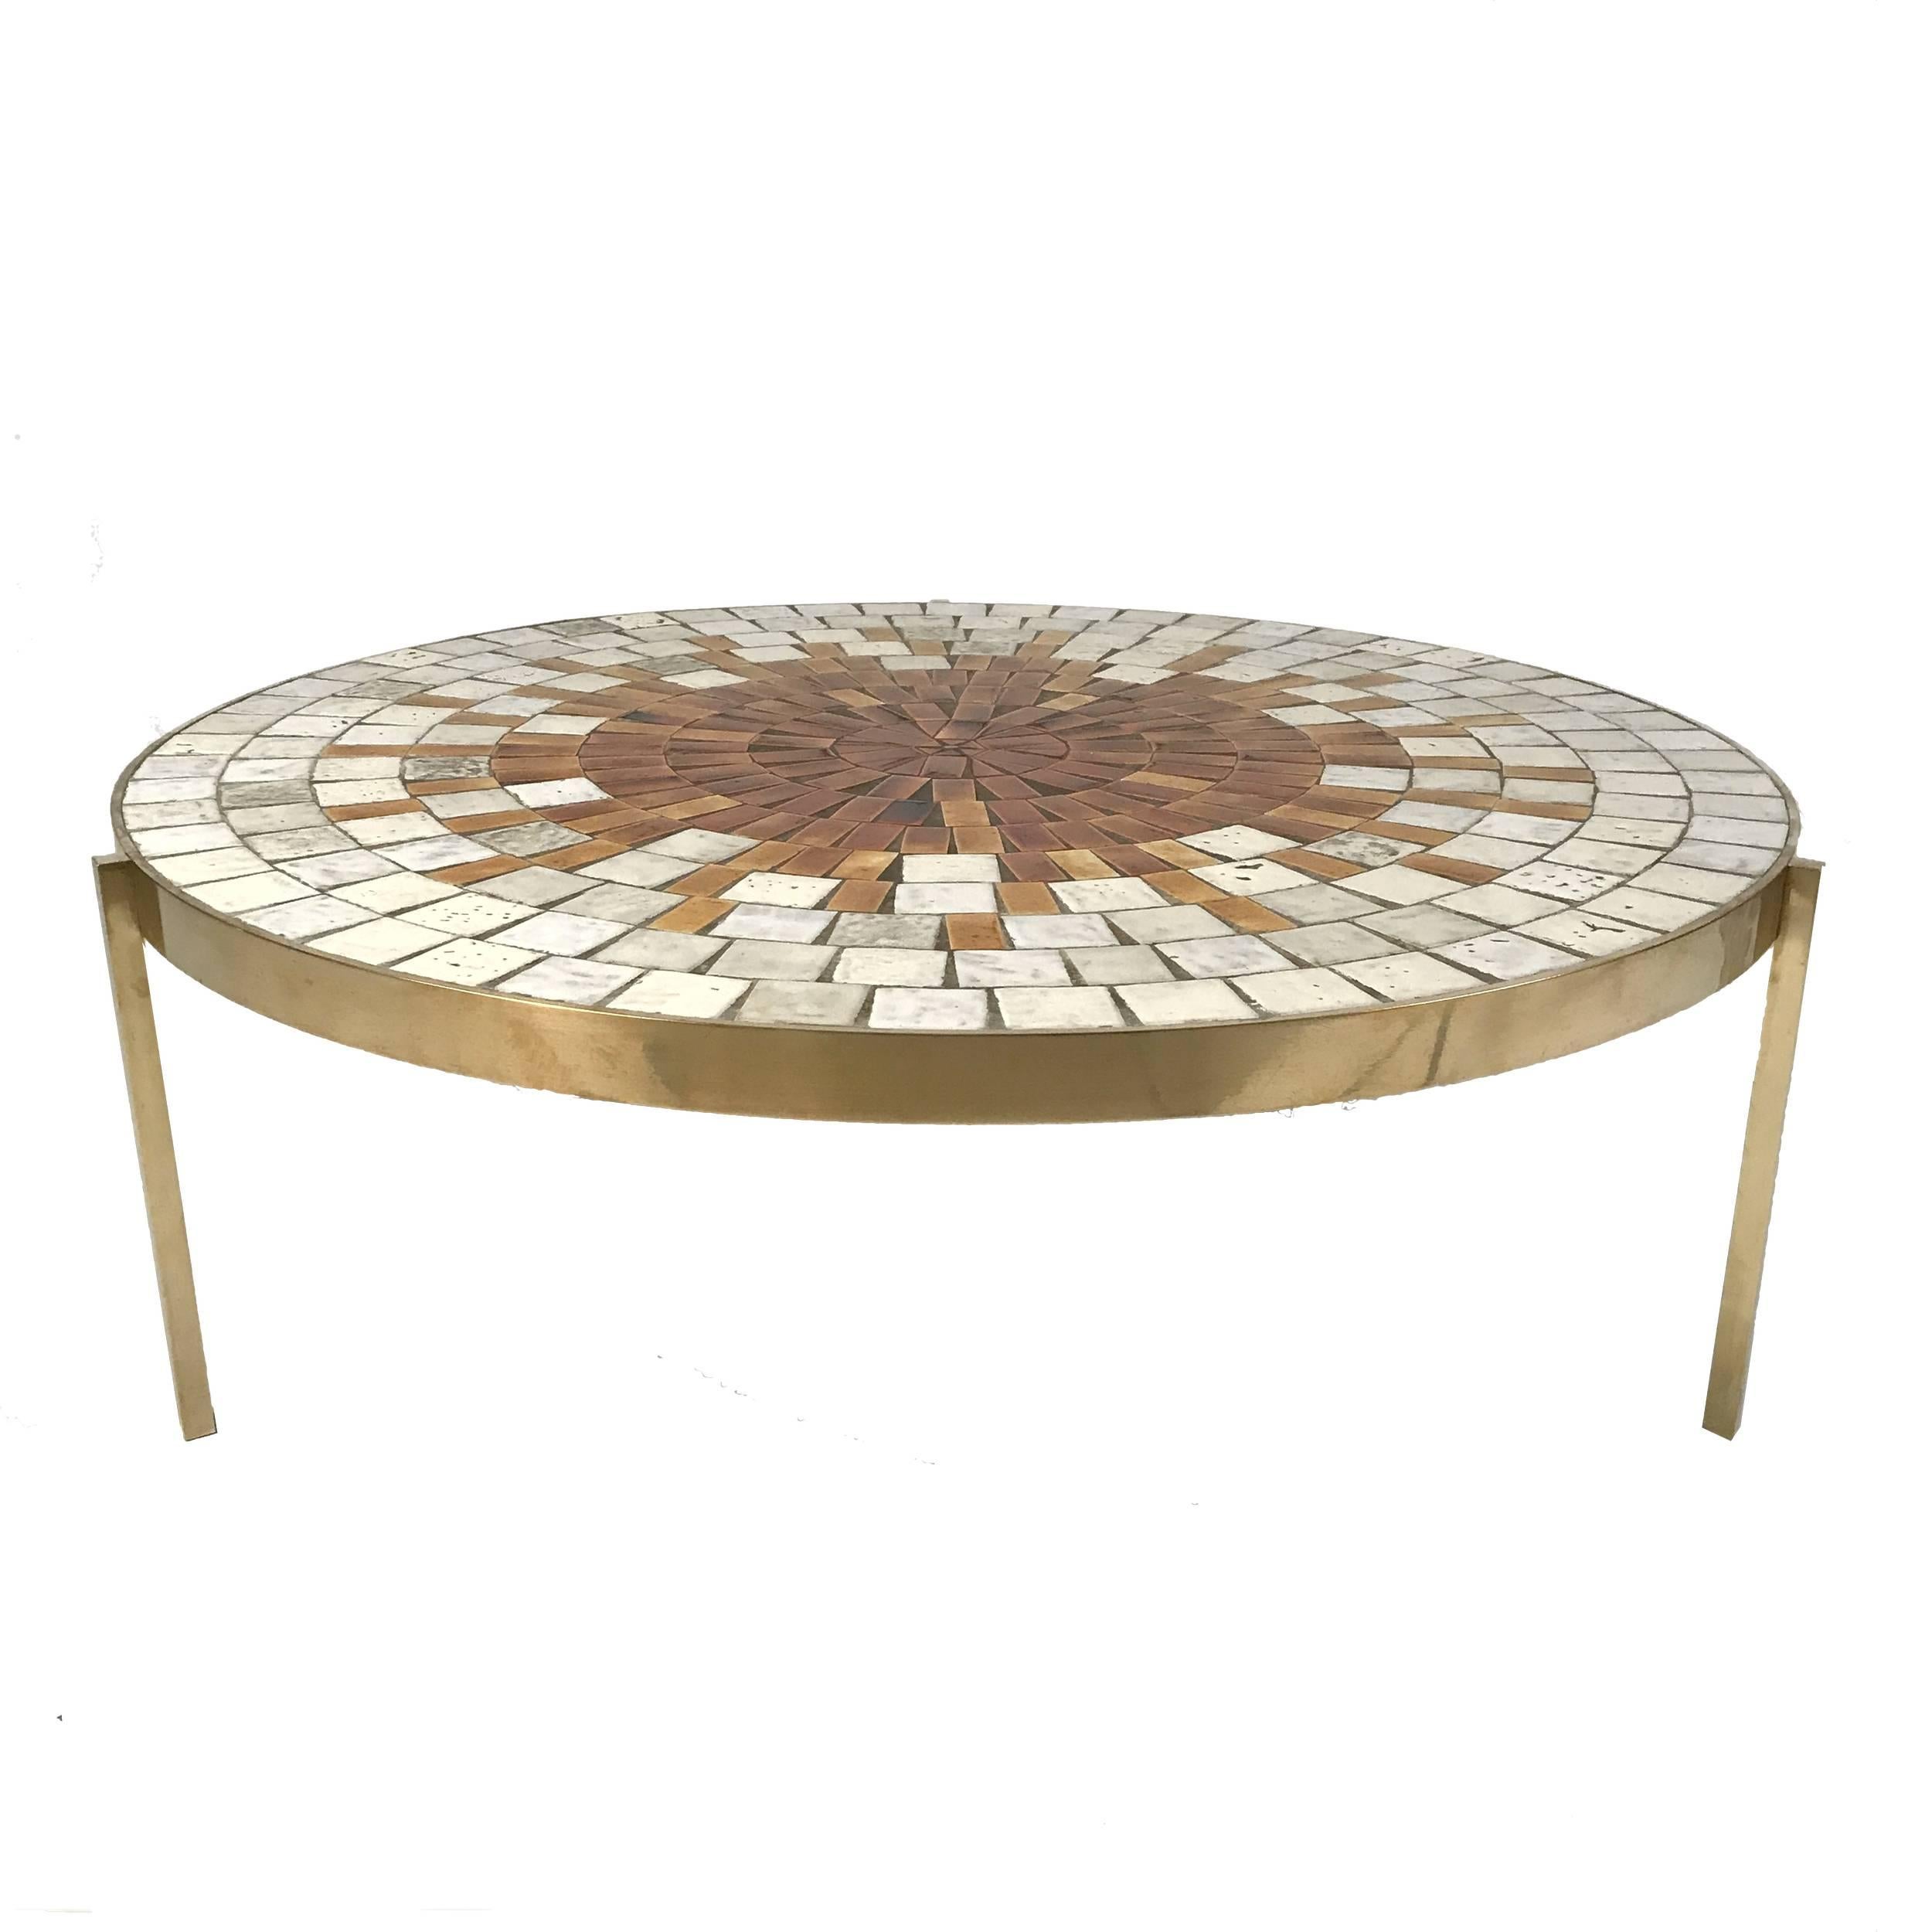 Heavy brass base with many handmade glazed ceramic tiles on top. Rare three-leg version of this table. Absolutely stunning in person.